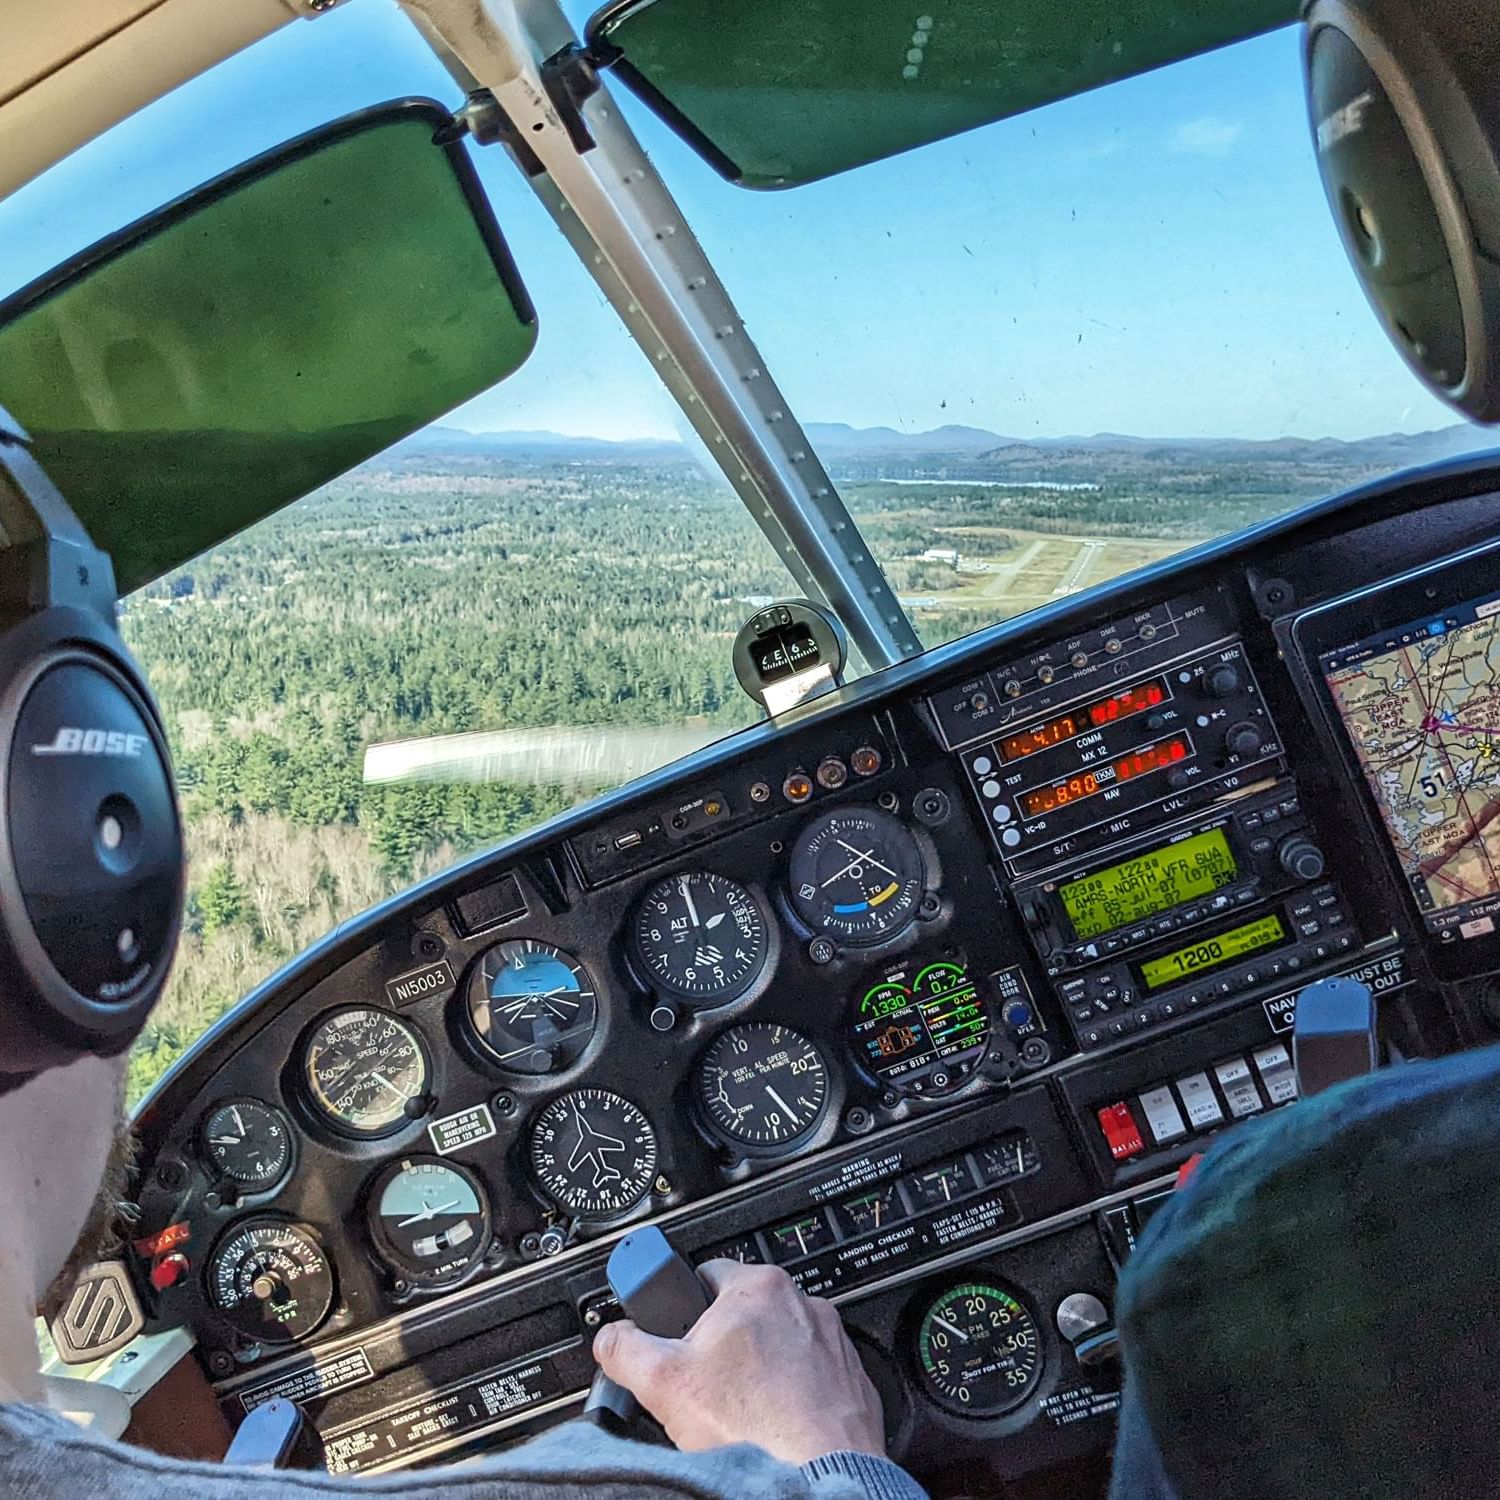 Cockpit view from a small aircraft landing near Peaks Resort